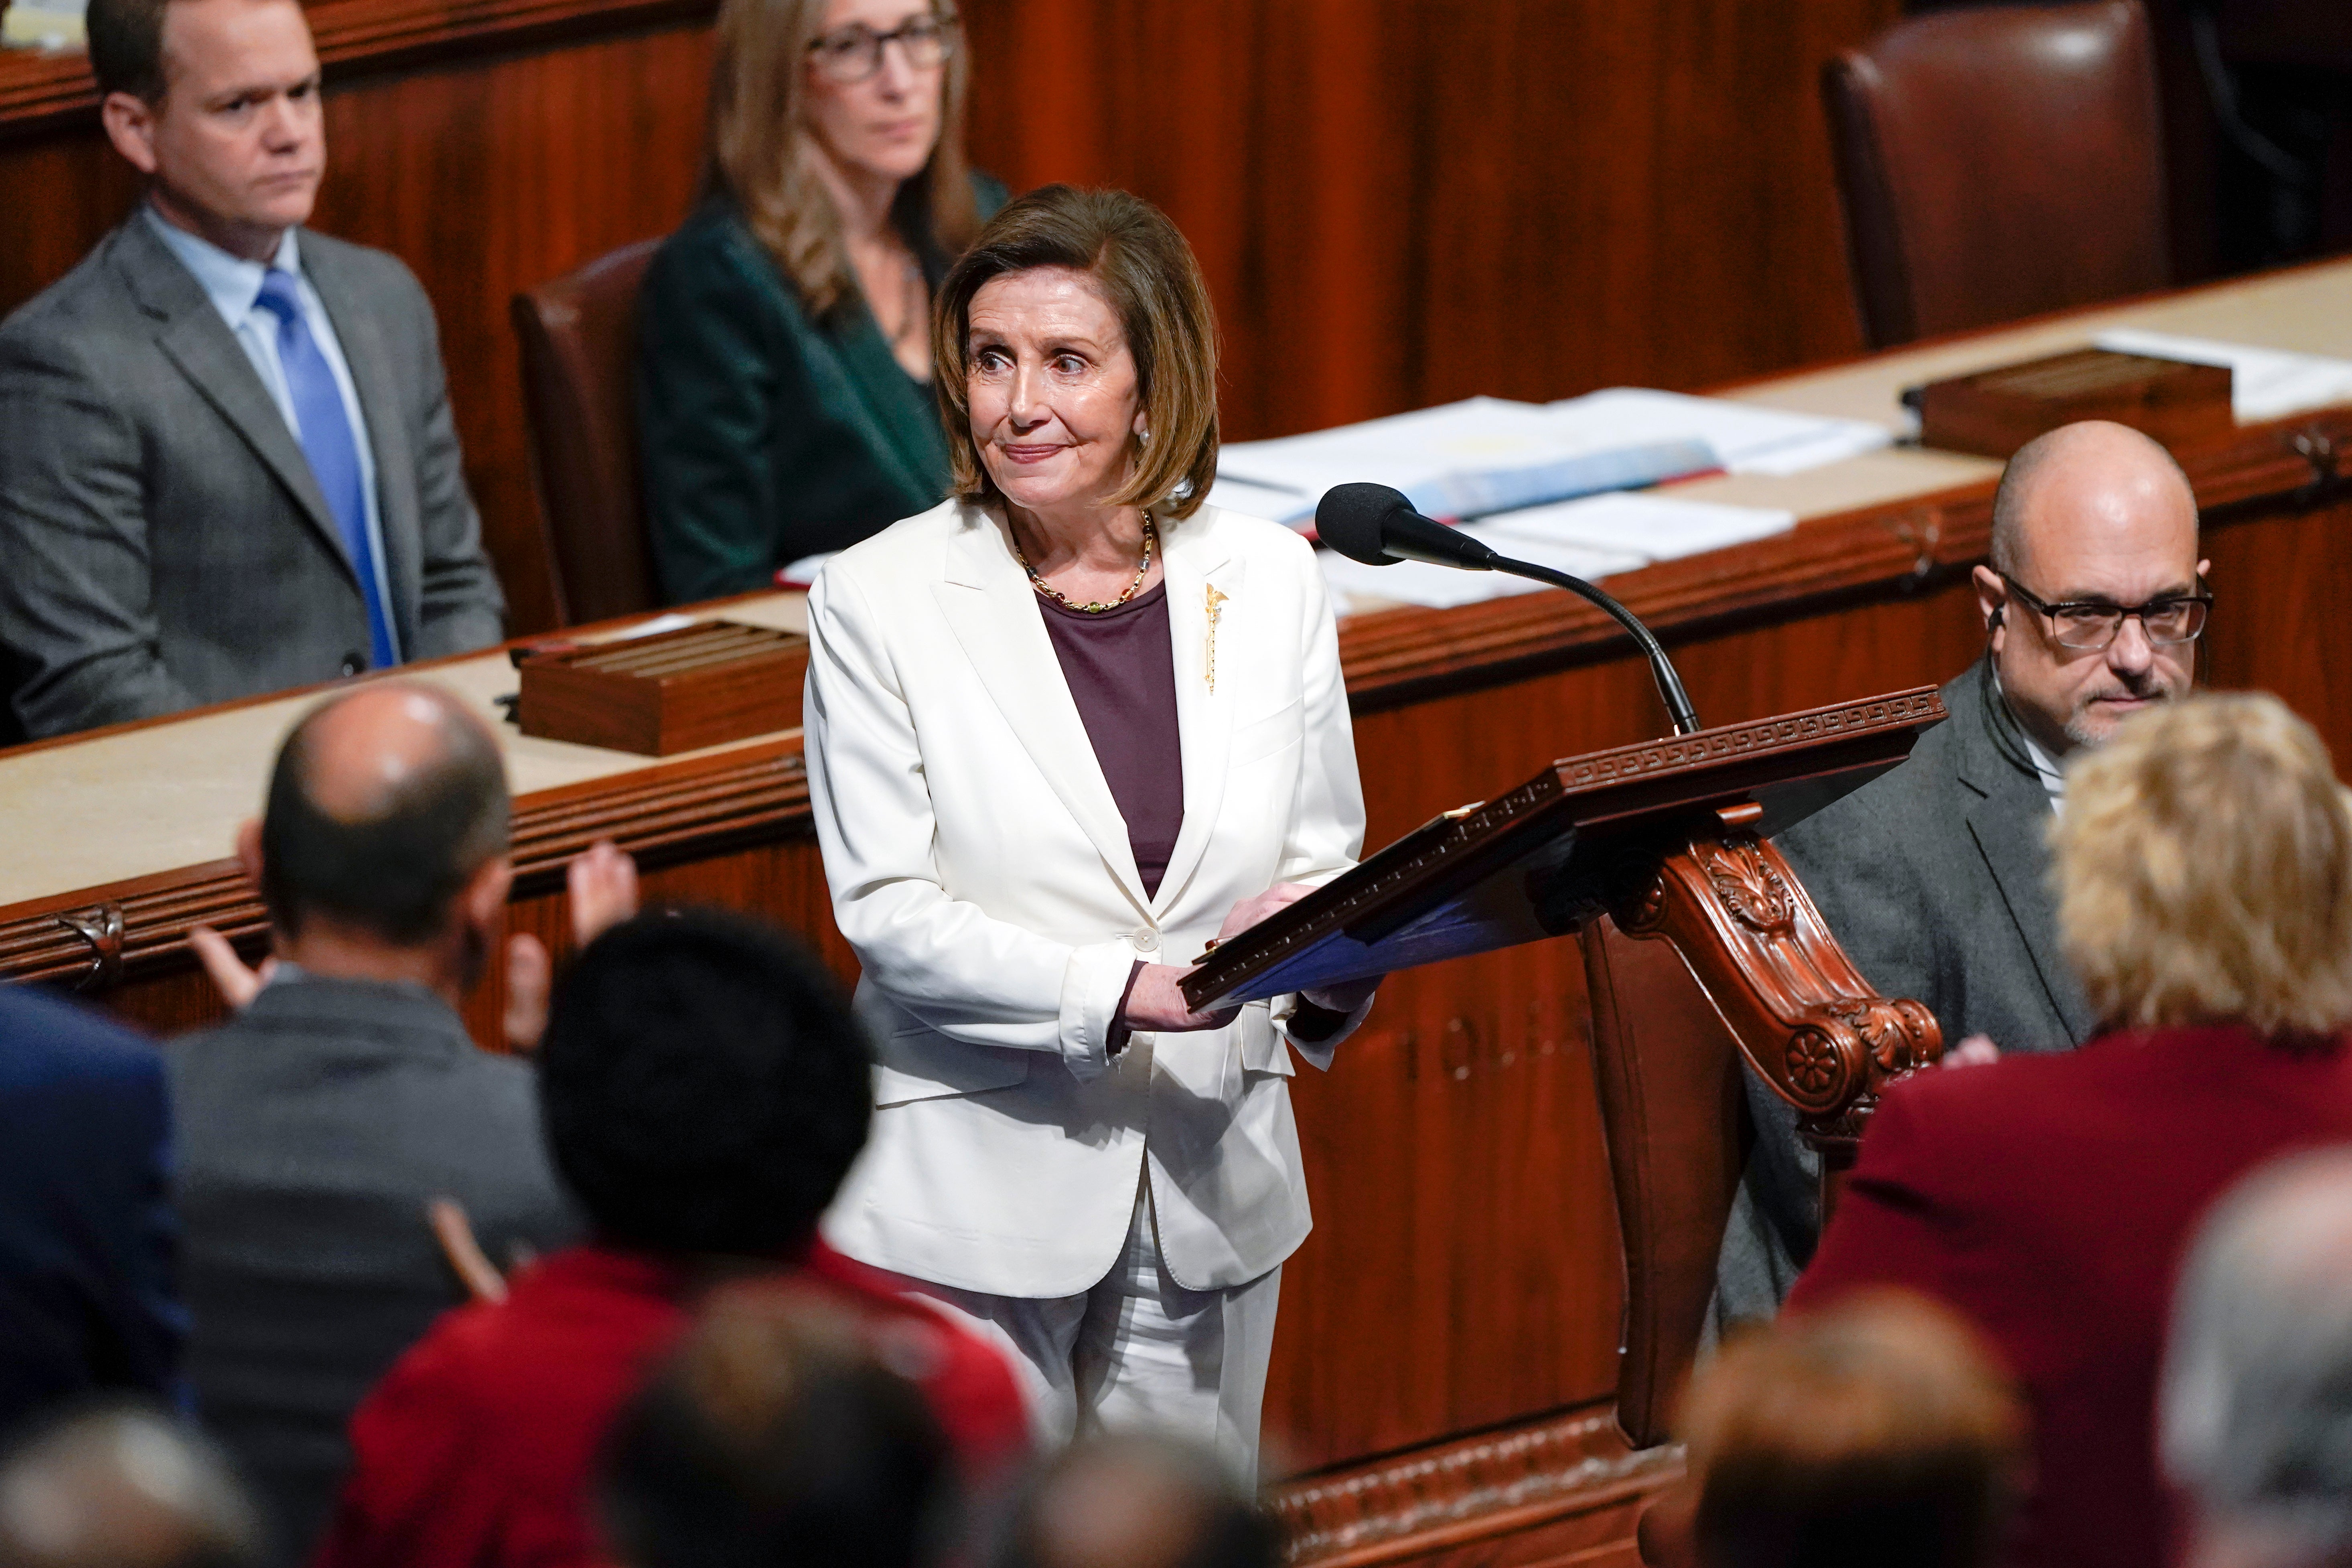 House Speaker Nancy Pelosi of Calif., acknowledges applauds from lawmakers after speaking on the House floor at the Capitol in Washington Thursday, Nov. 17, 2022